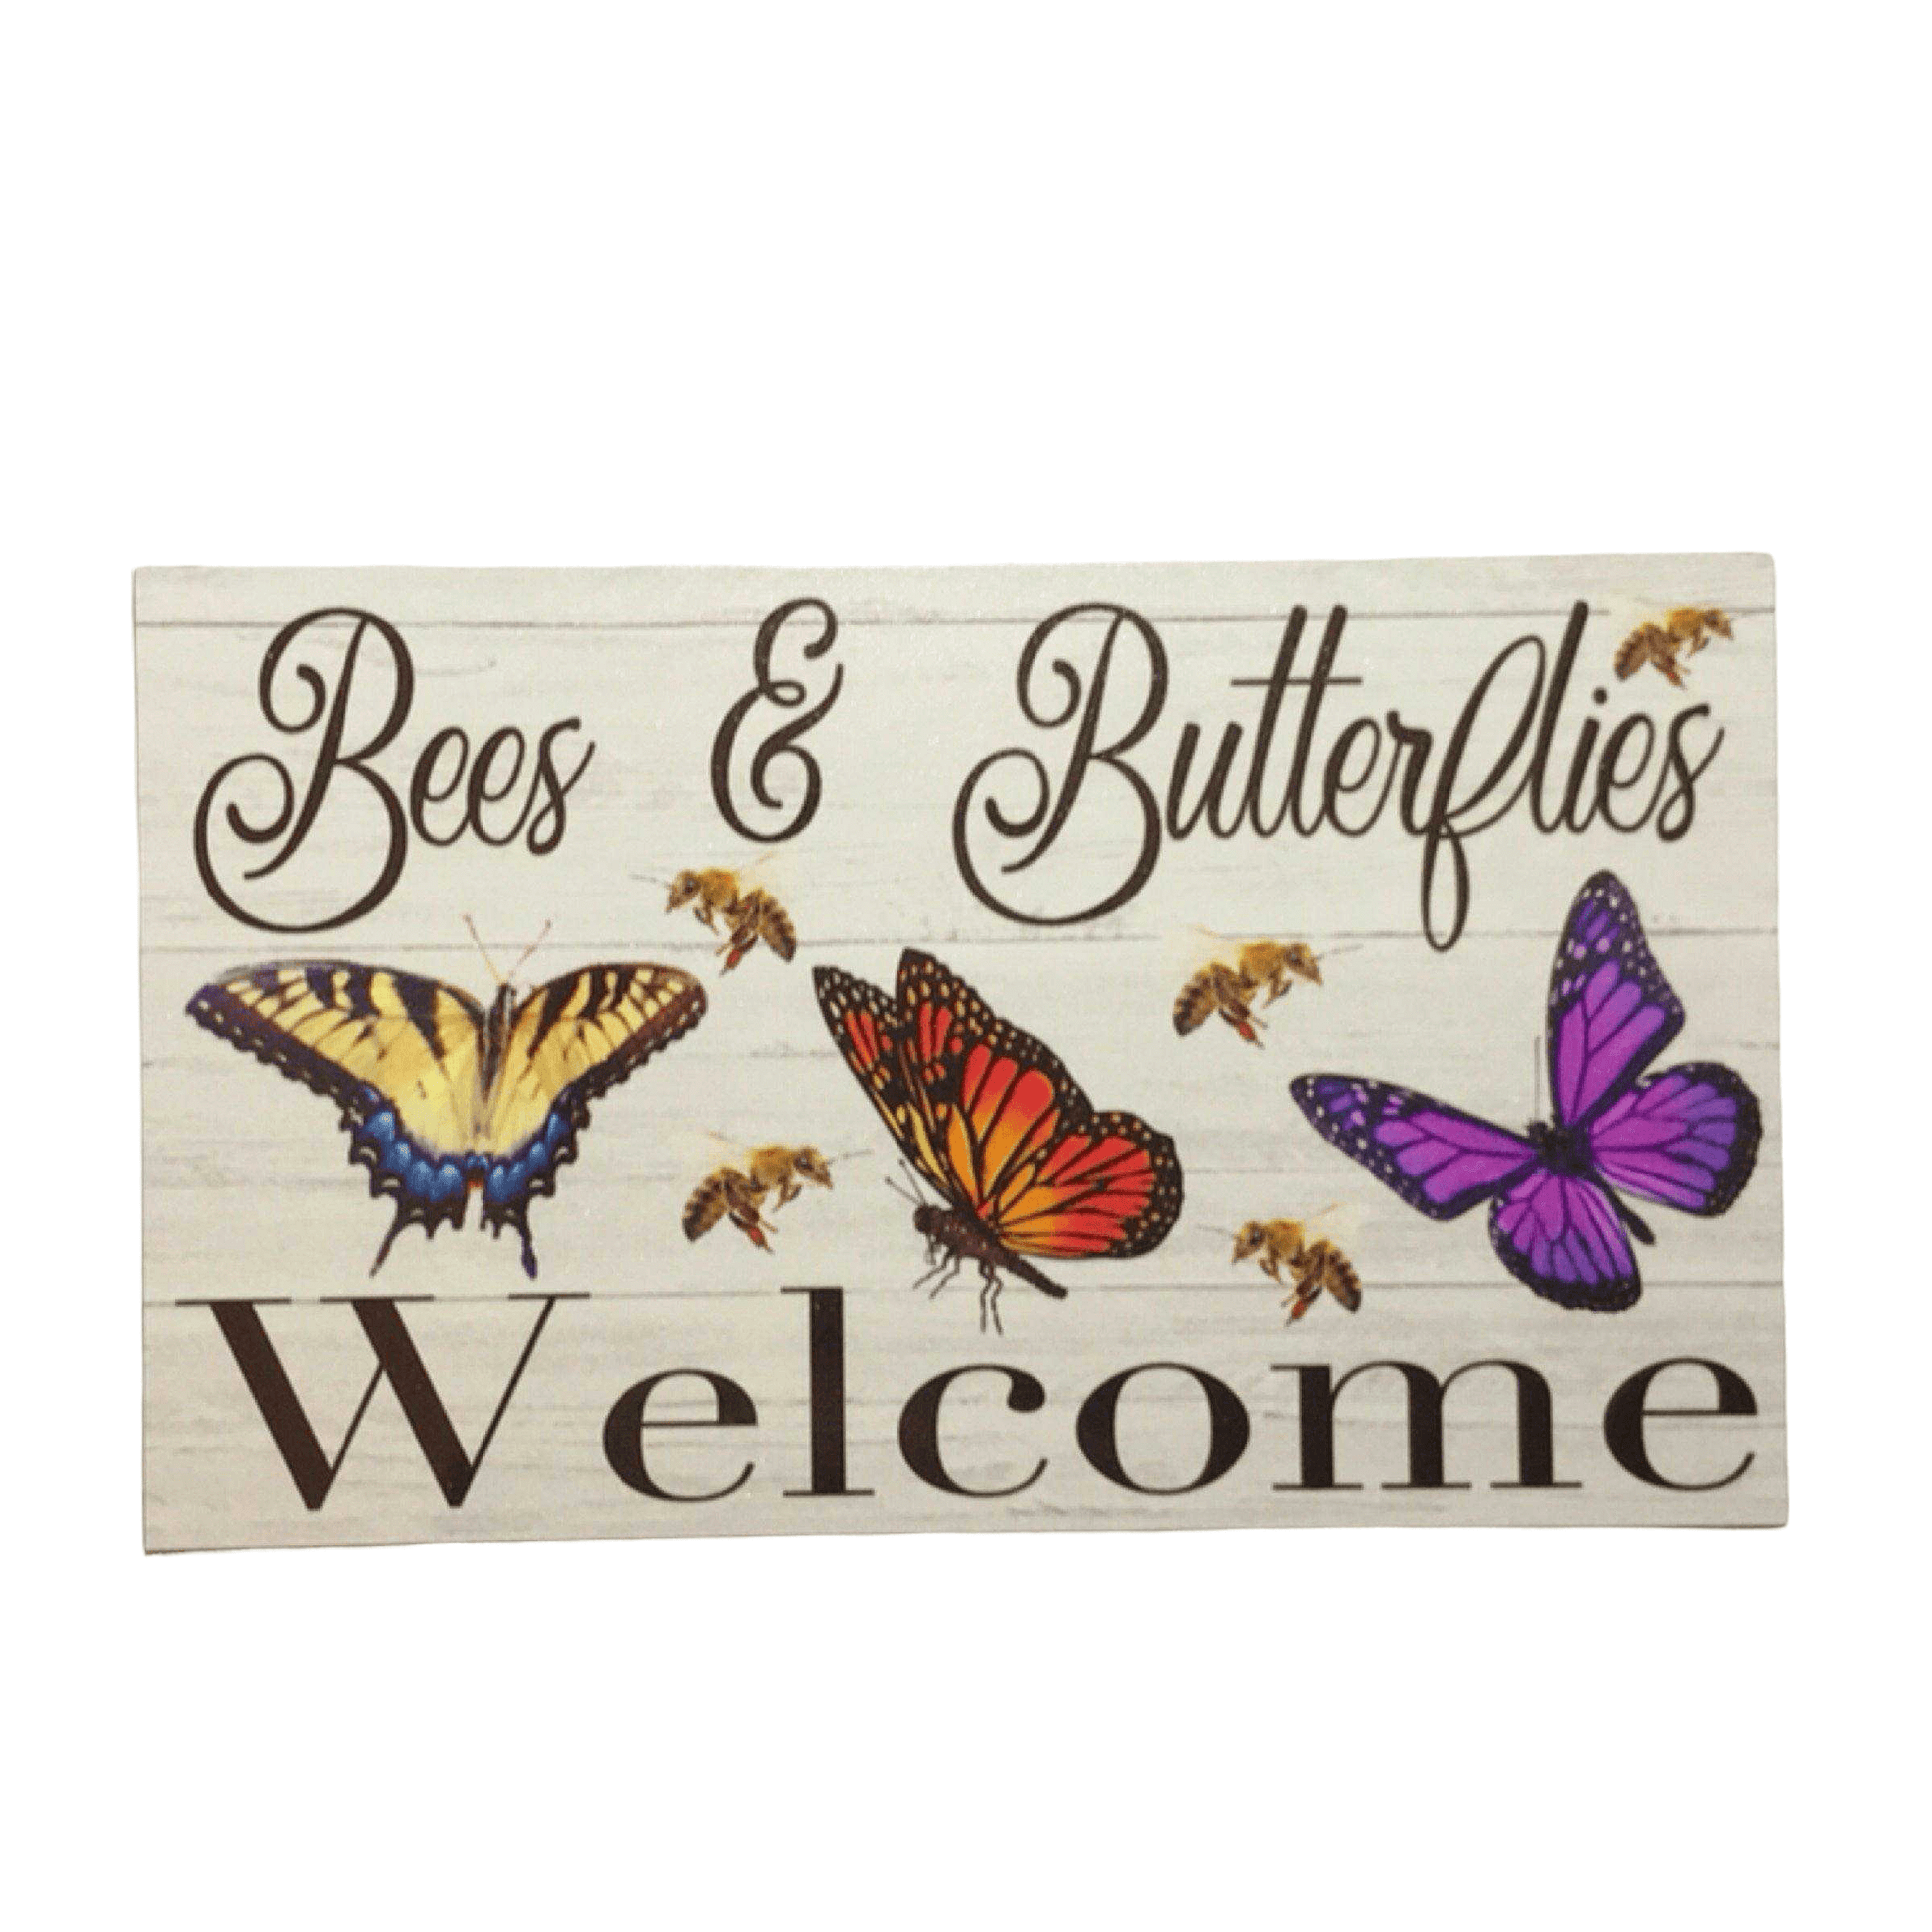 Bees & Butterflies Welcome Sign - The Renmy Store Homewares & Gifts 